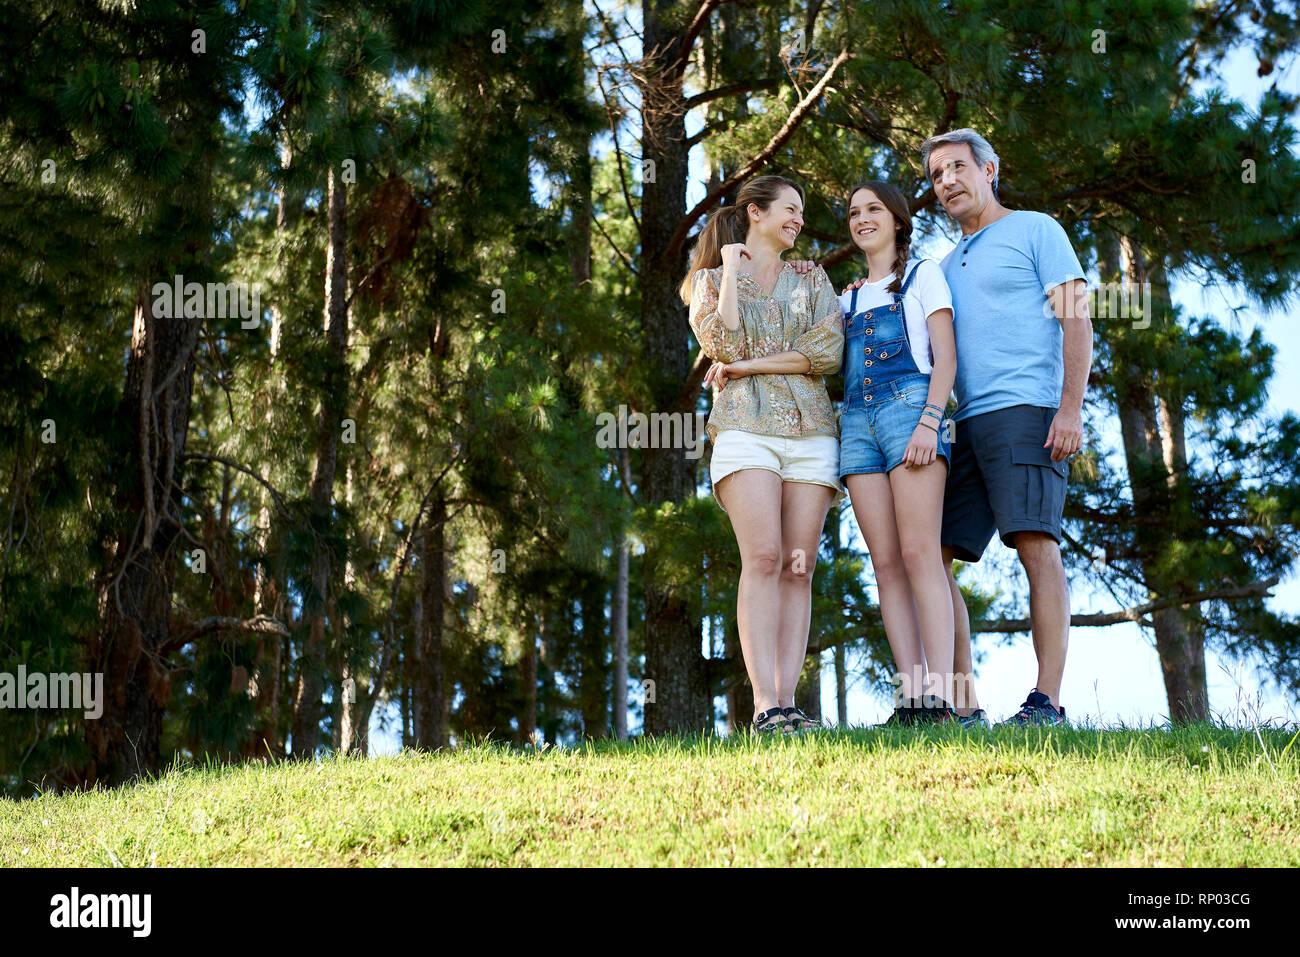 Family standing together on grassy hill Stock Photo